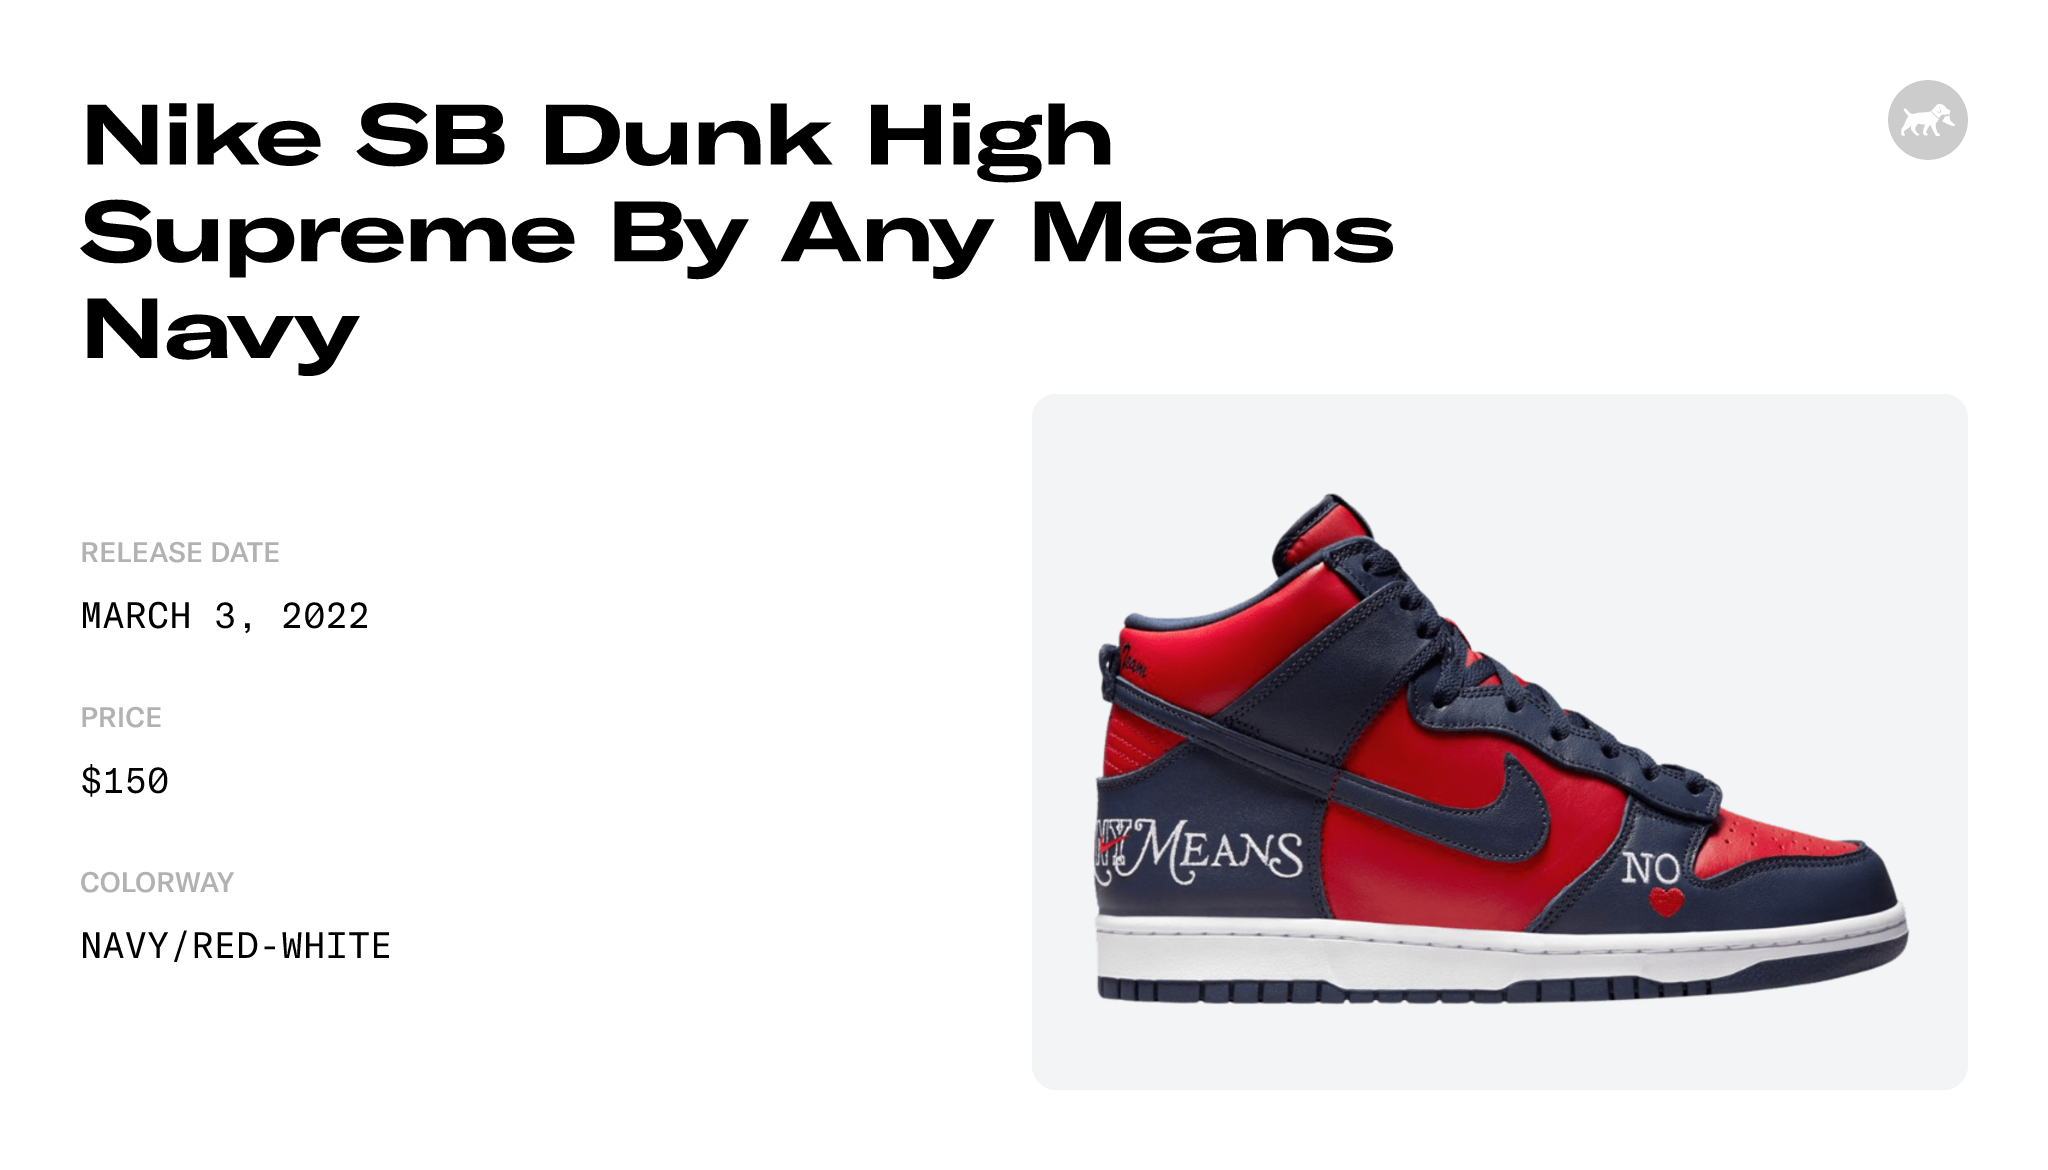 Nike SB Dunk High Supreme By Any Means Navy - DN3741-600 Raffles and  Release Date